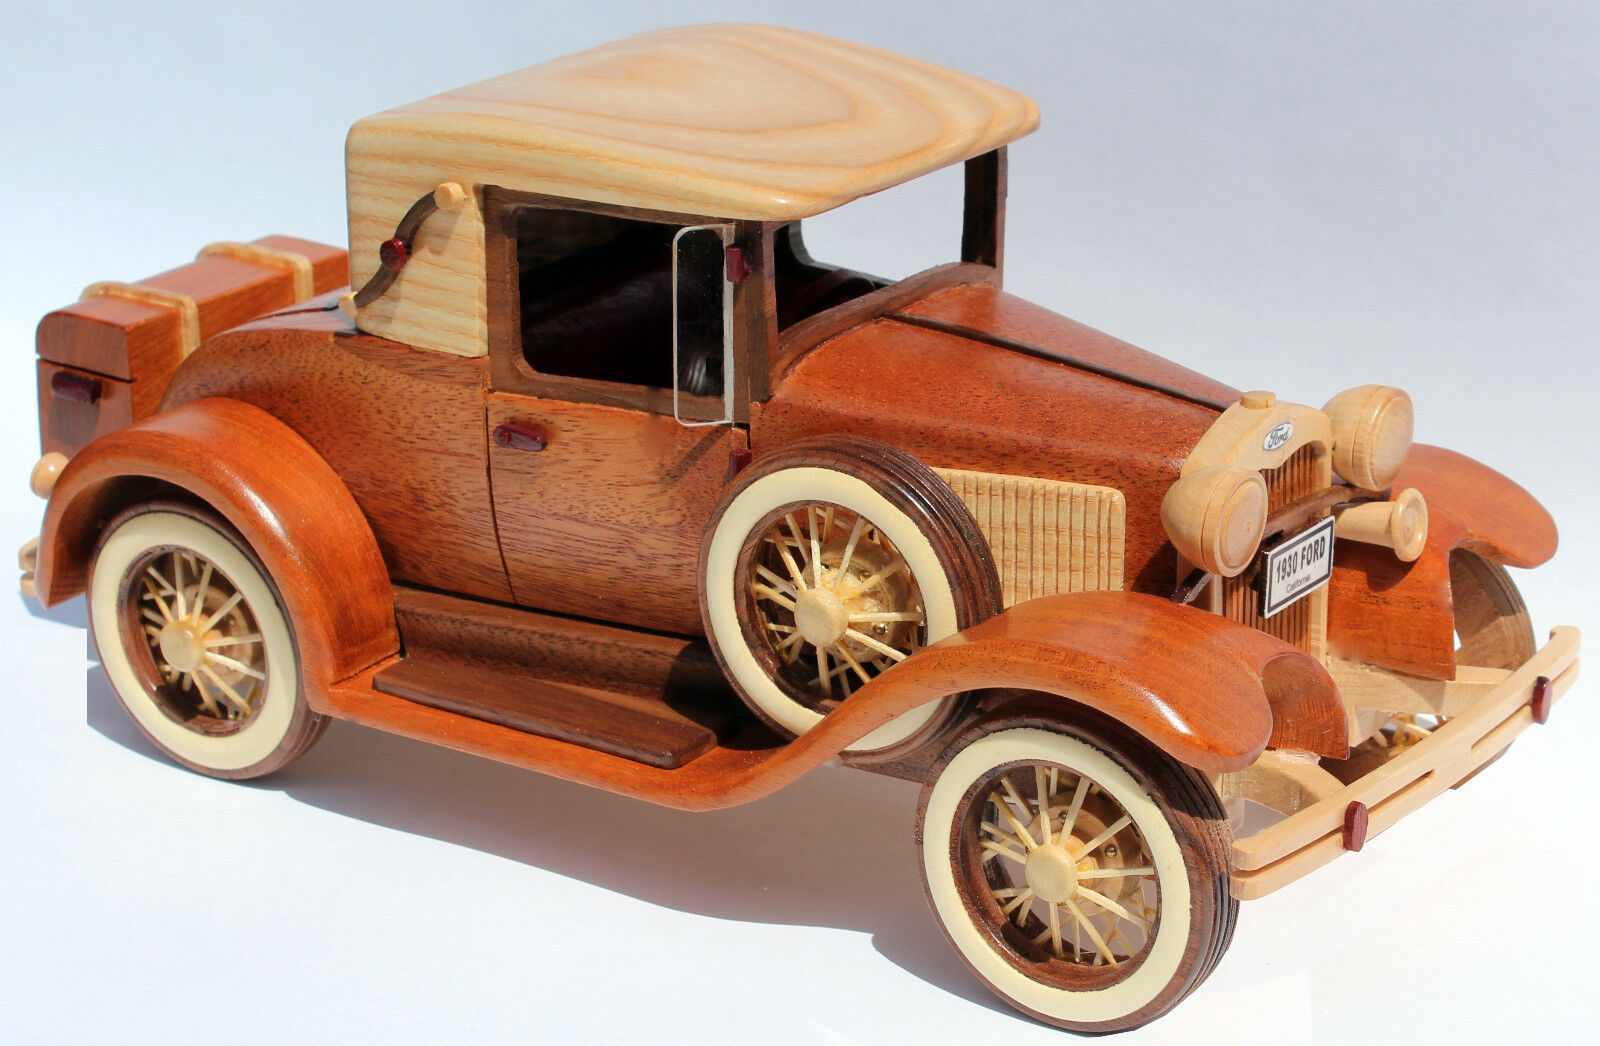 Woodworking plan for a makings 1930 Ford Model A automobile            